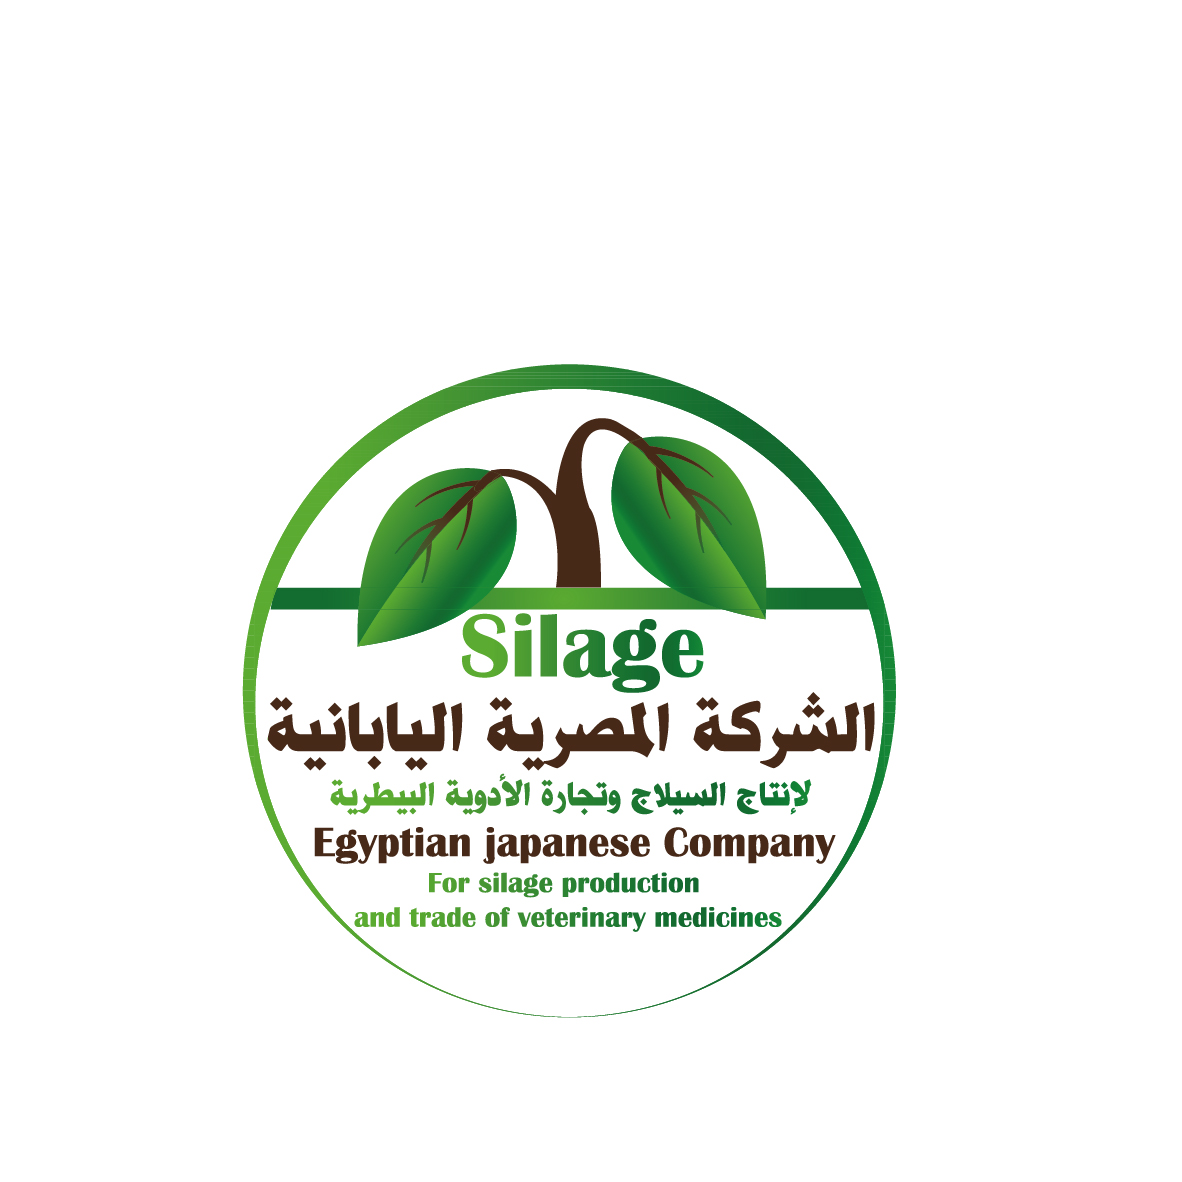 Egyptian japanese Company For silage production and trade of veterinary medicines